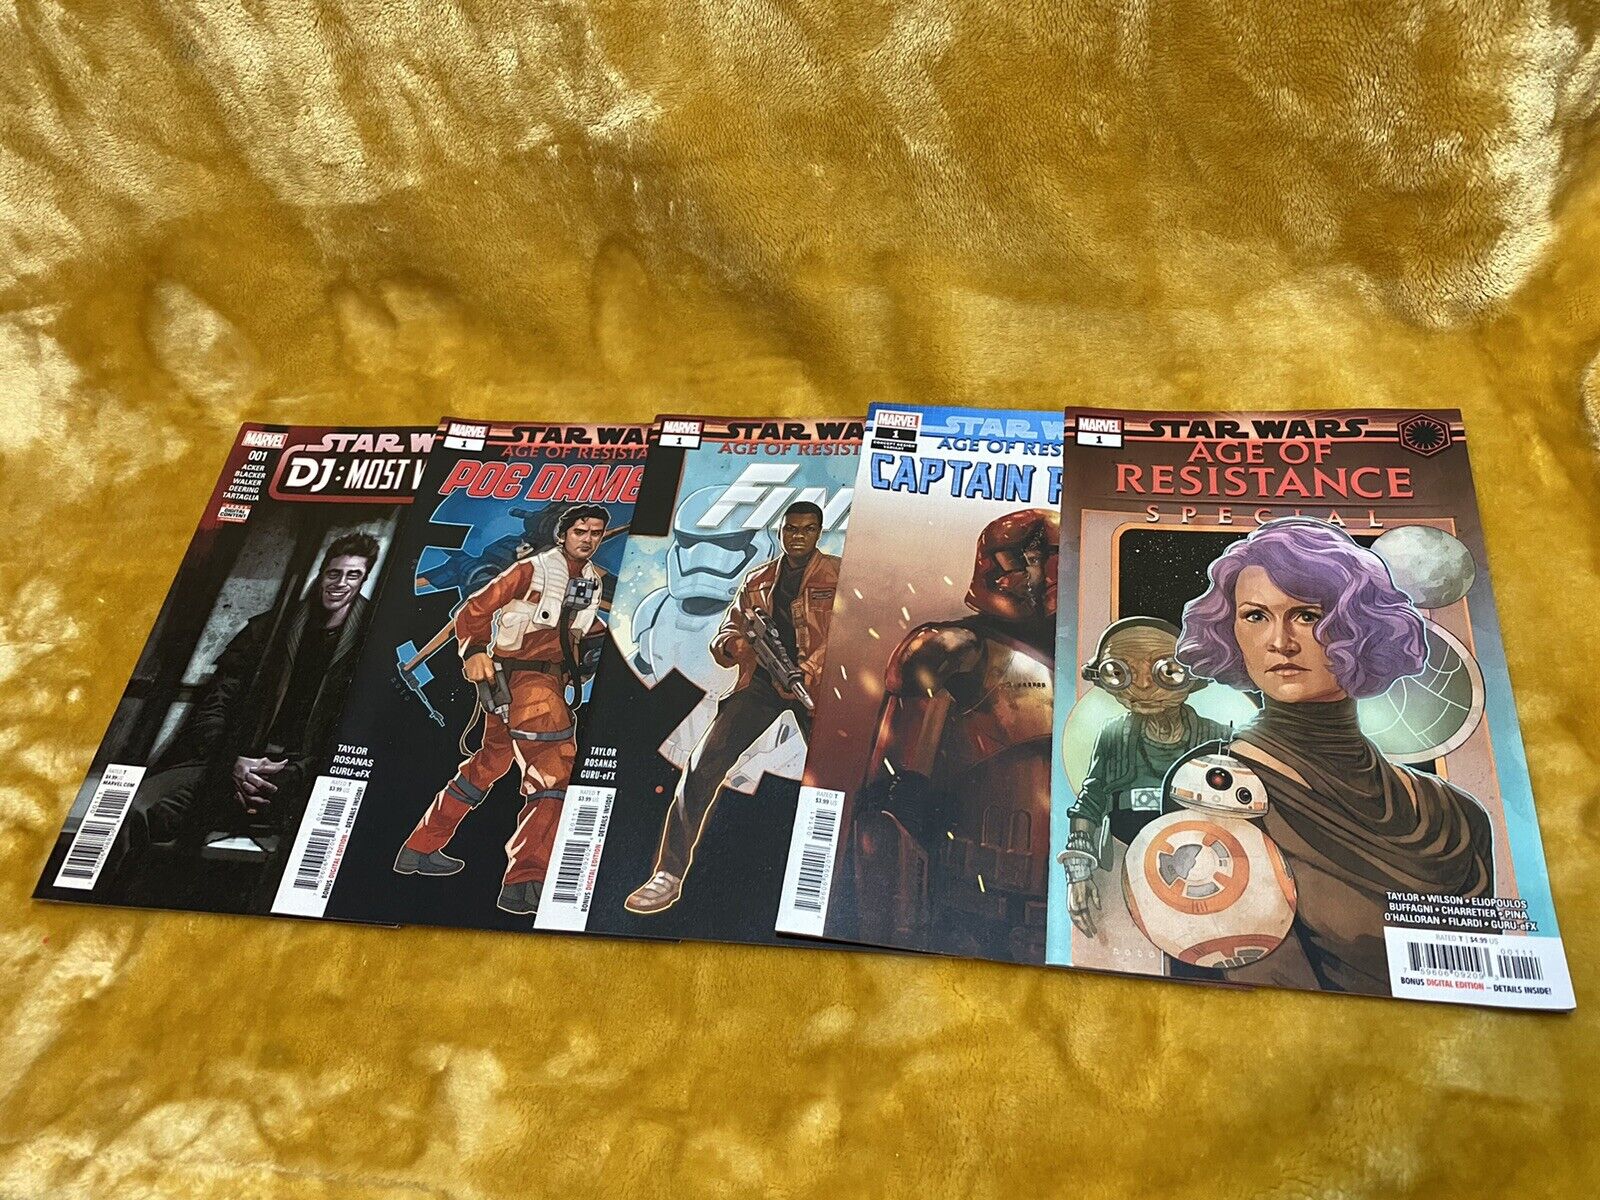 Unread Marvel Comic Star Wars Age Of Resistance Special Mixed Lot of 5 All #1's!